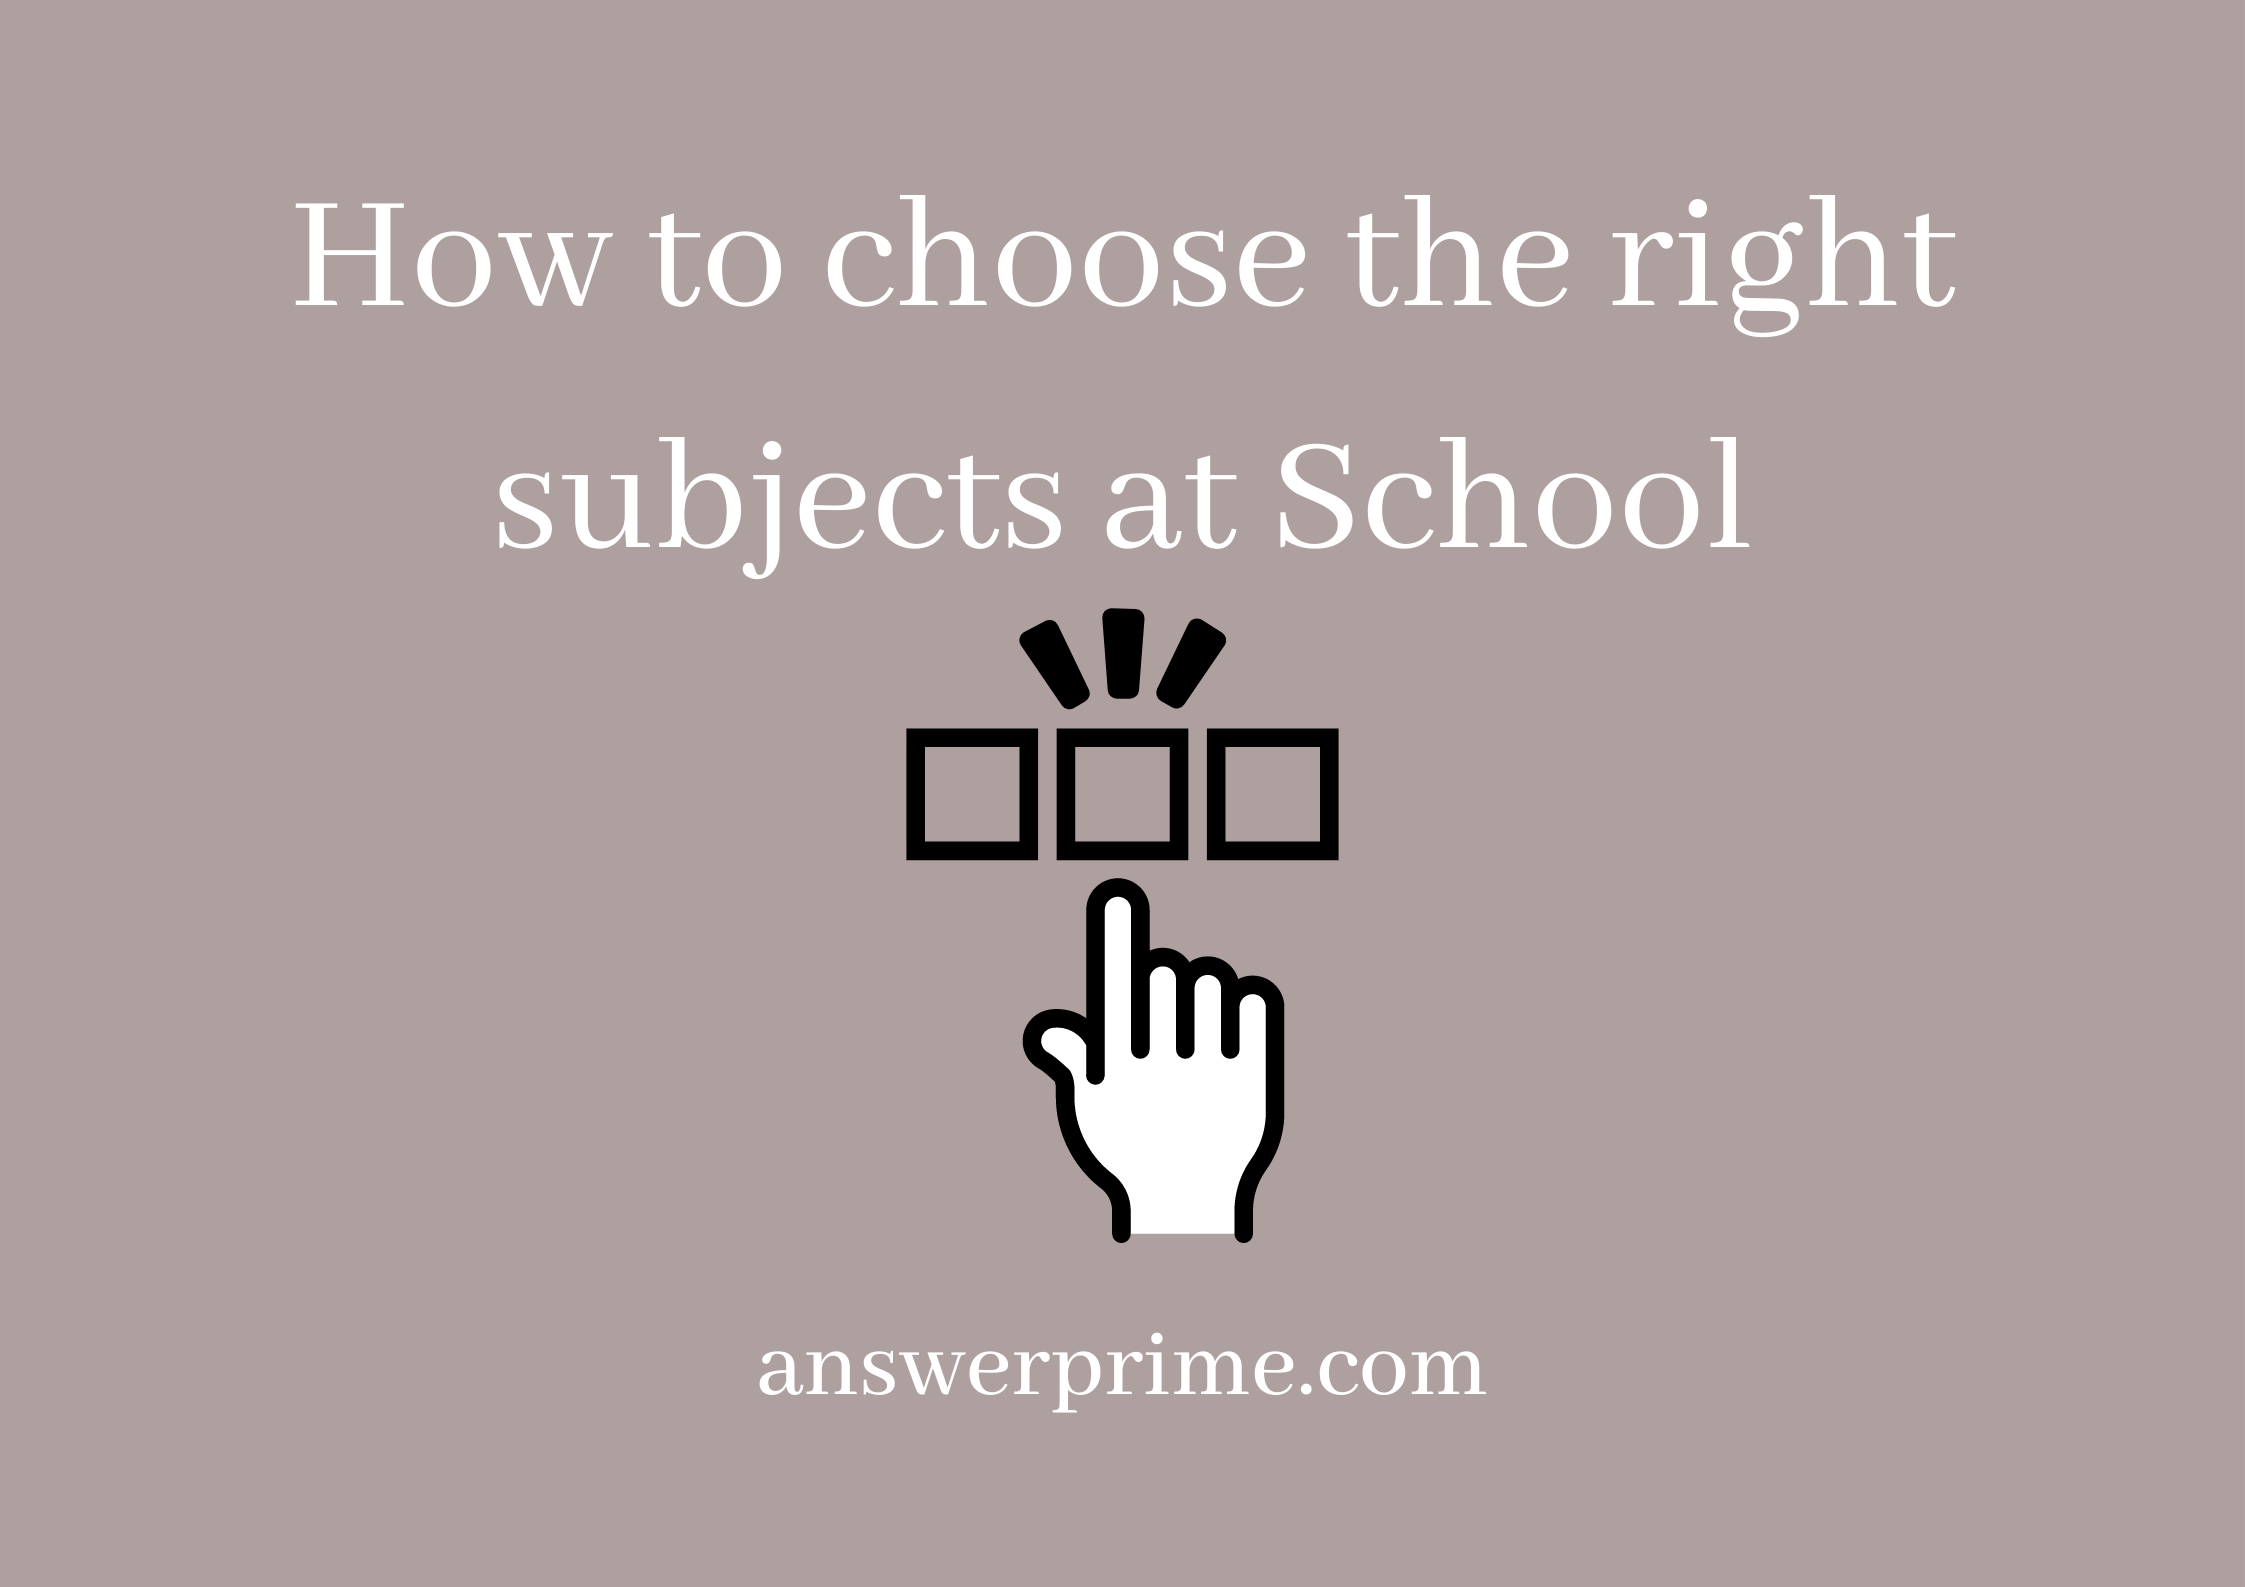 How to choose the right subjects at School